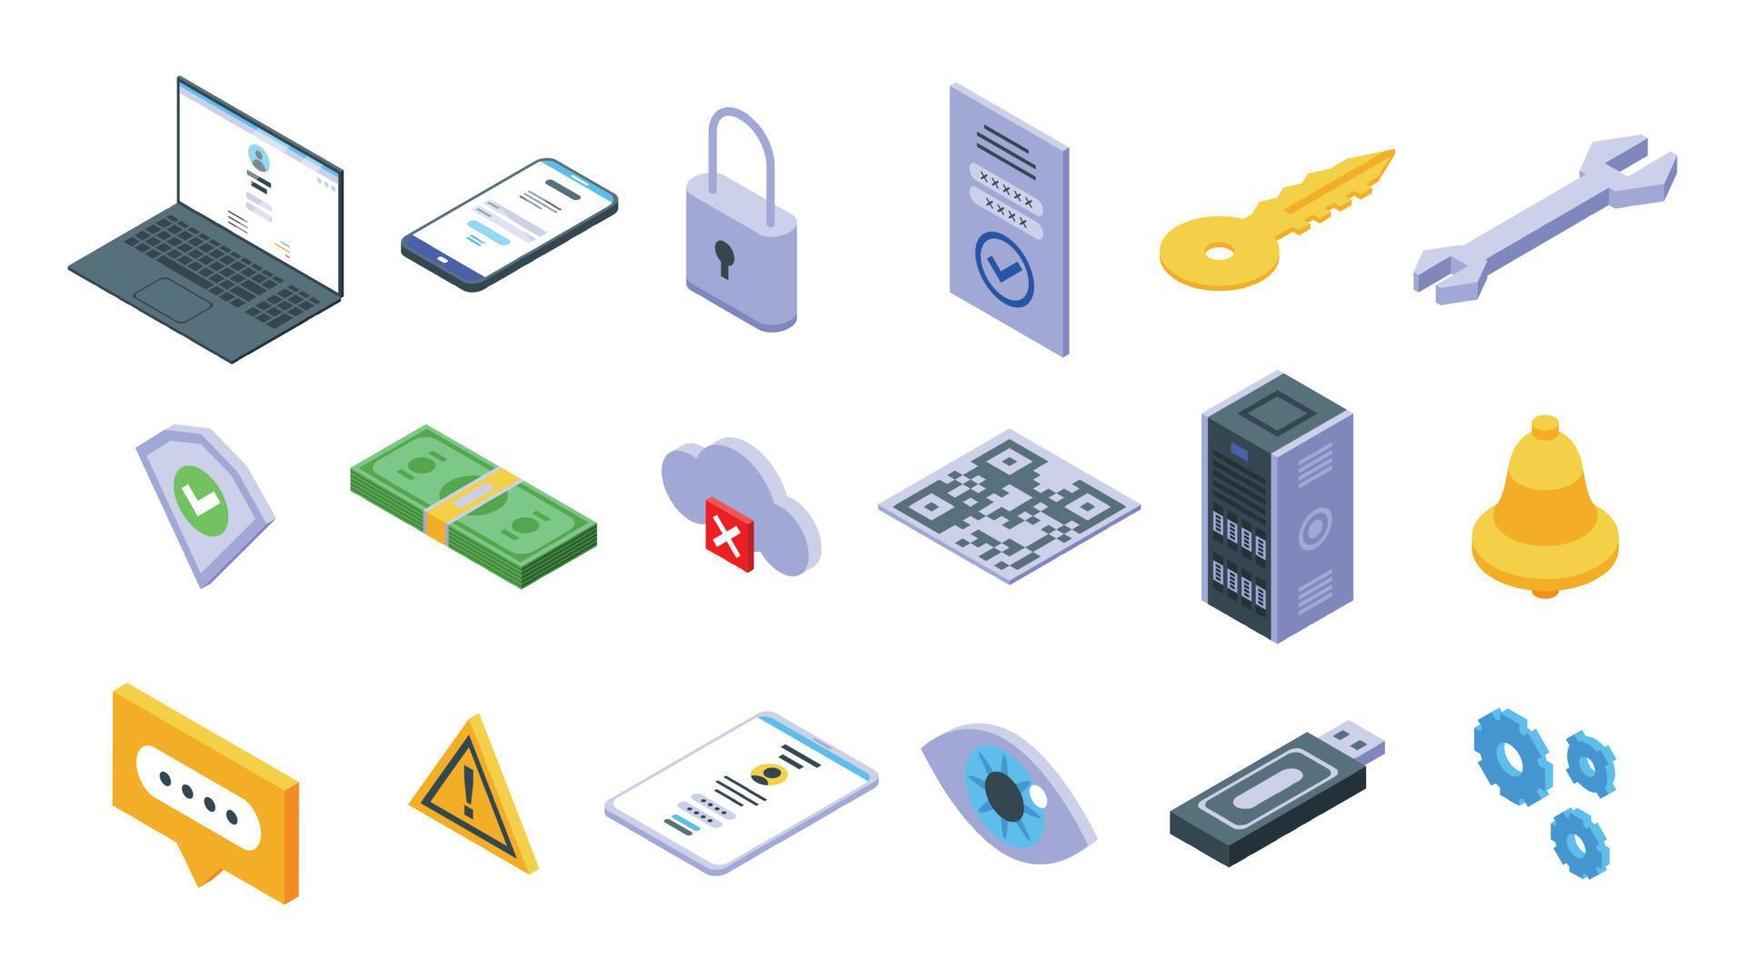 Multi-factor authentication icons set, isometric style vector